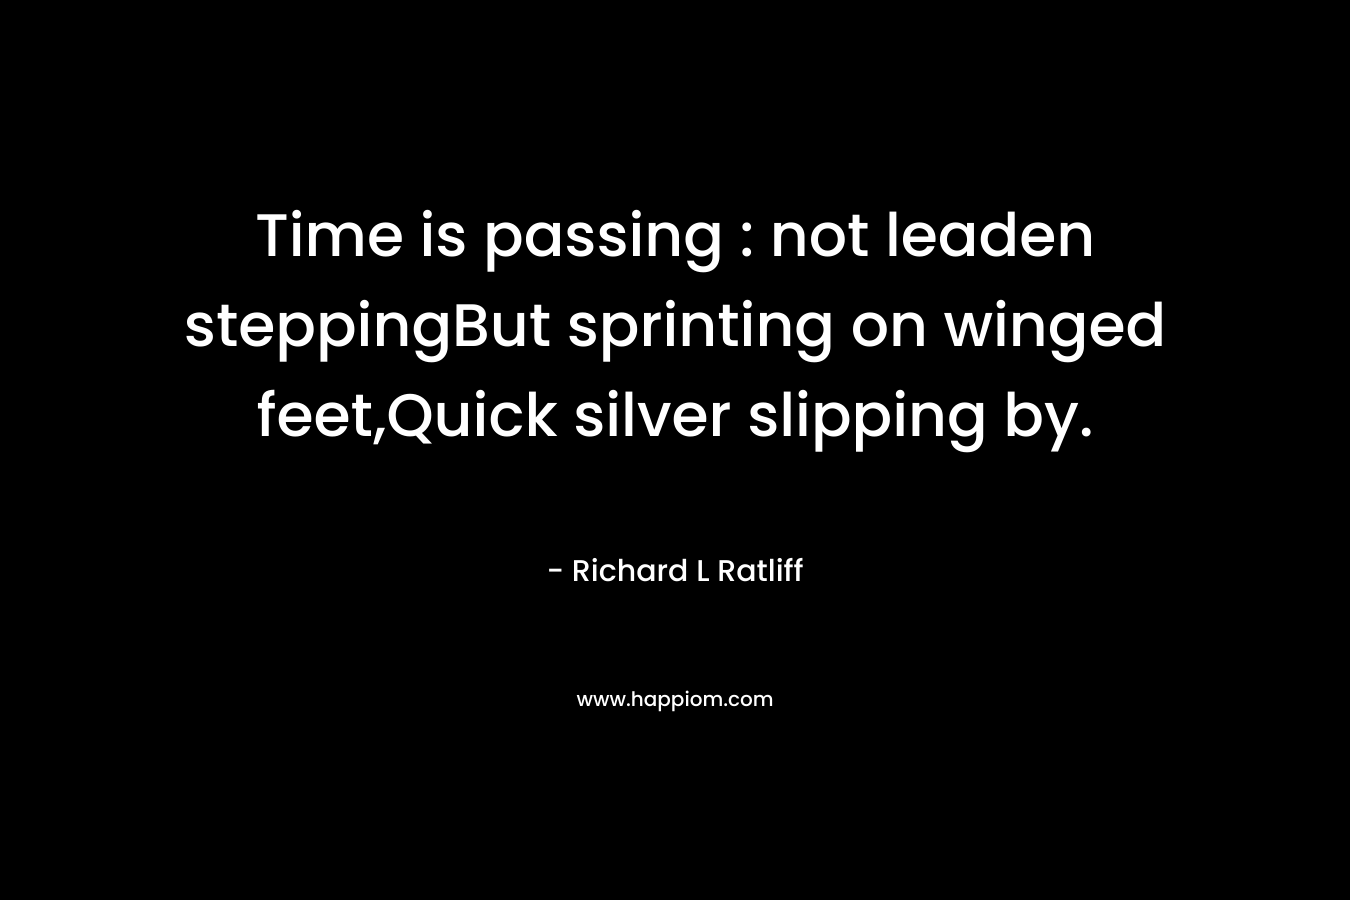 Time is passing : not leaden steppingBut sprinting on winged feet,Quick silver slipping by.